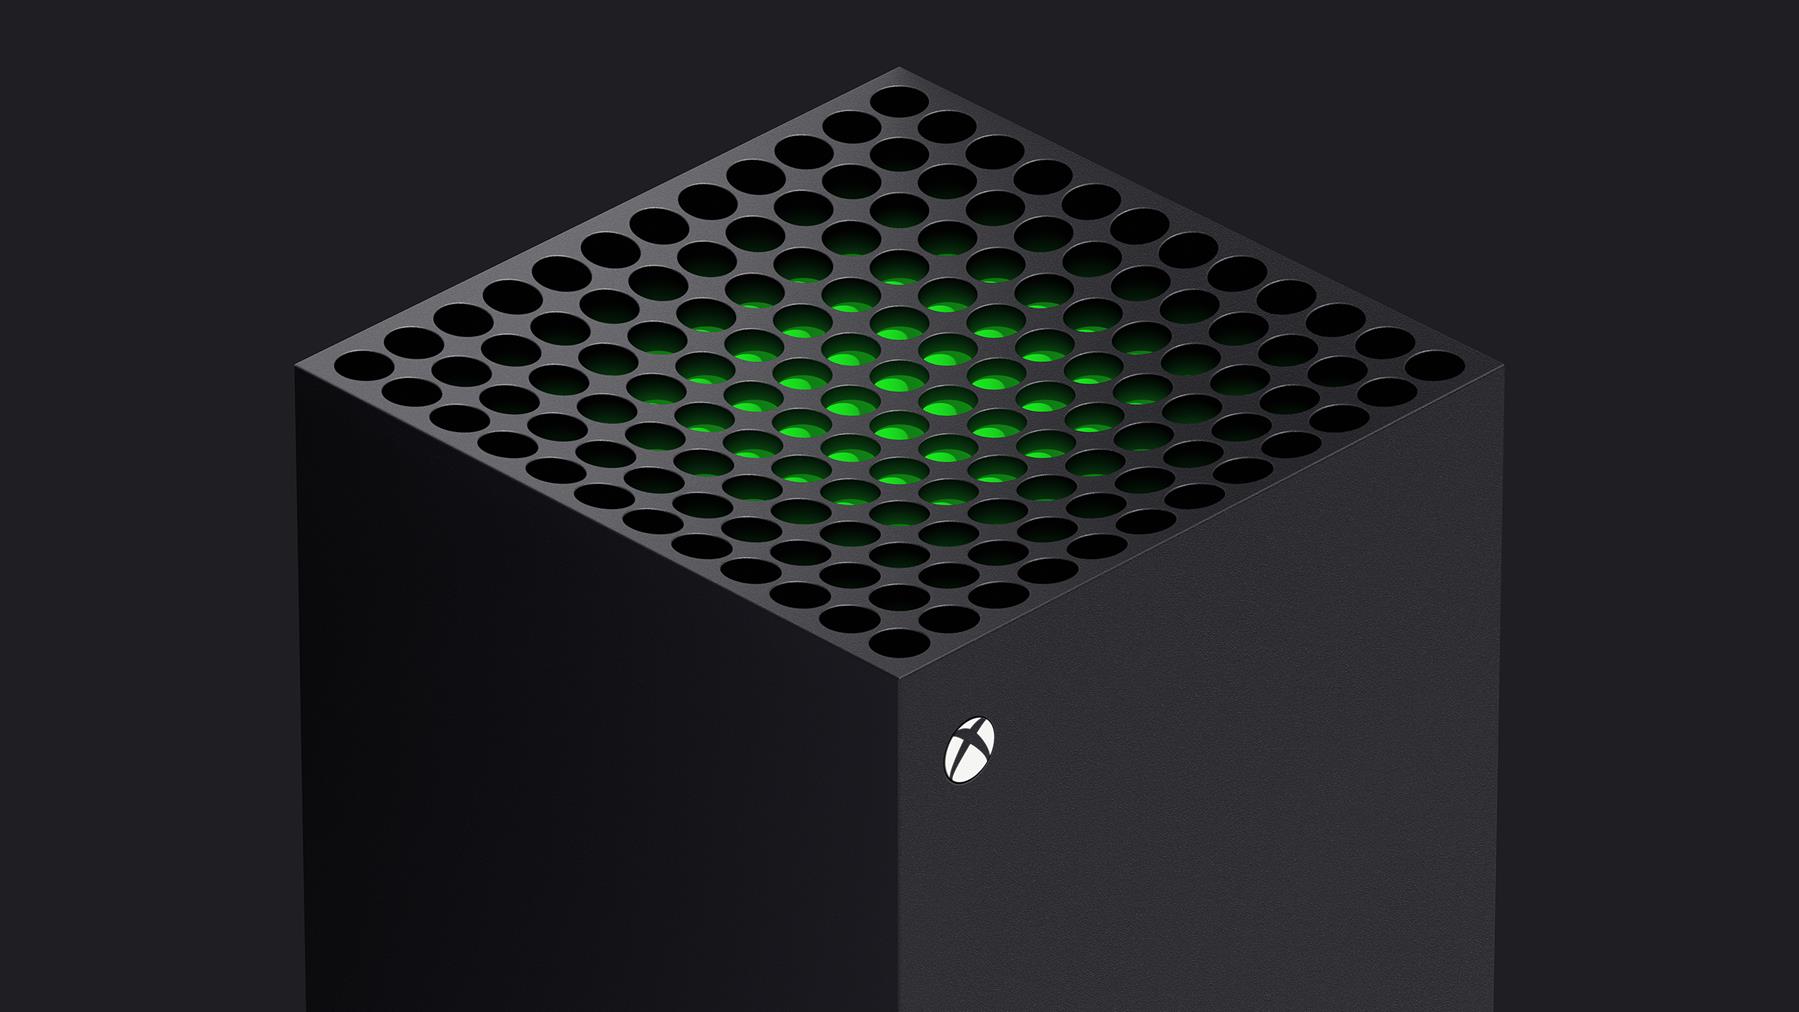 Developers making Xbox Series X games will learn to address PS5’s SSD advantage, says ex-Xbox lead